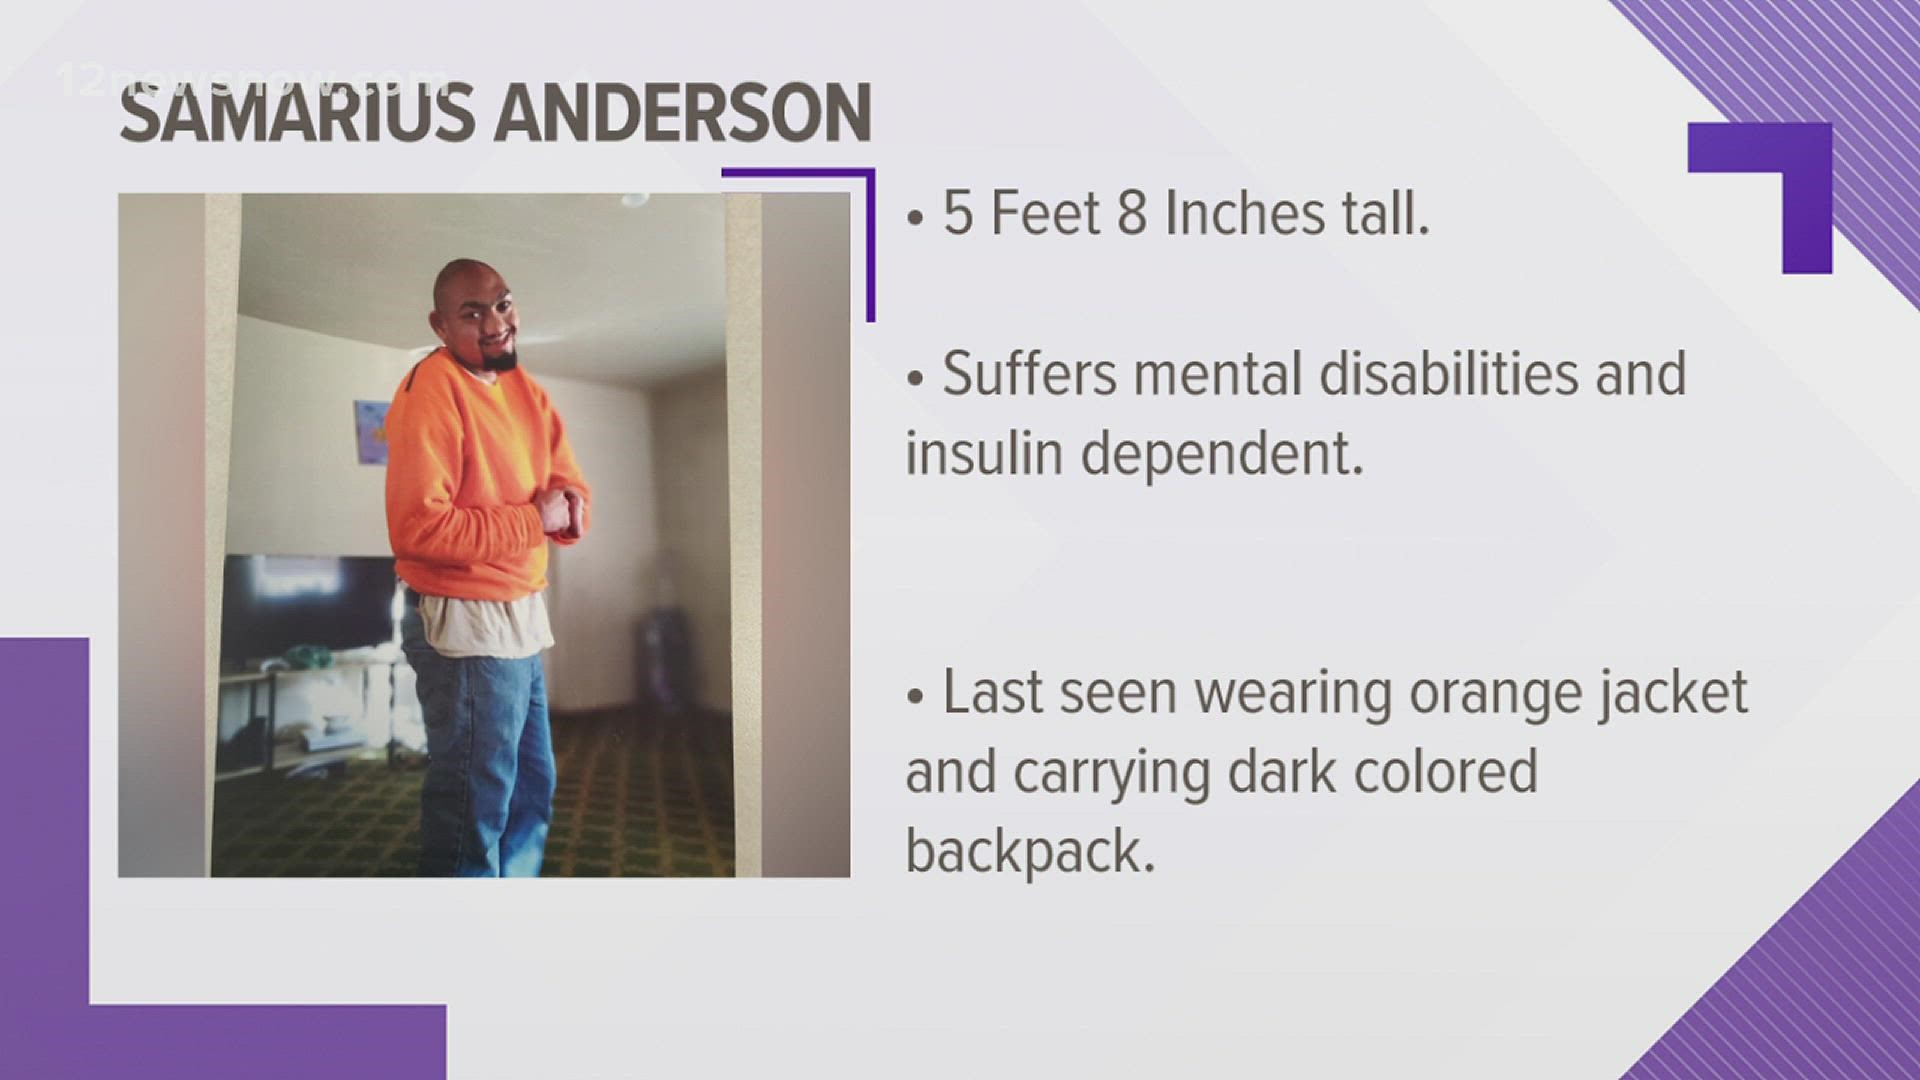 Samarius Anderson is 5'8, insulin dependent and was last seen wearing an orange jacket and carrying a dark colored backpack.